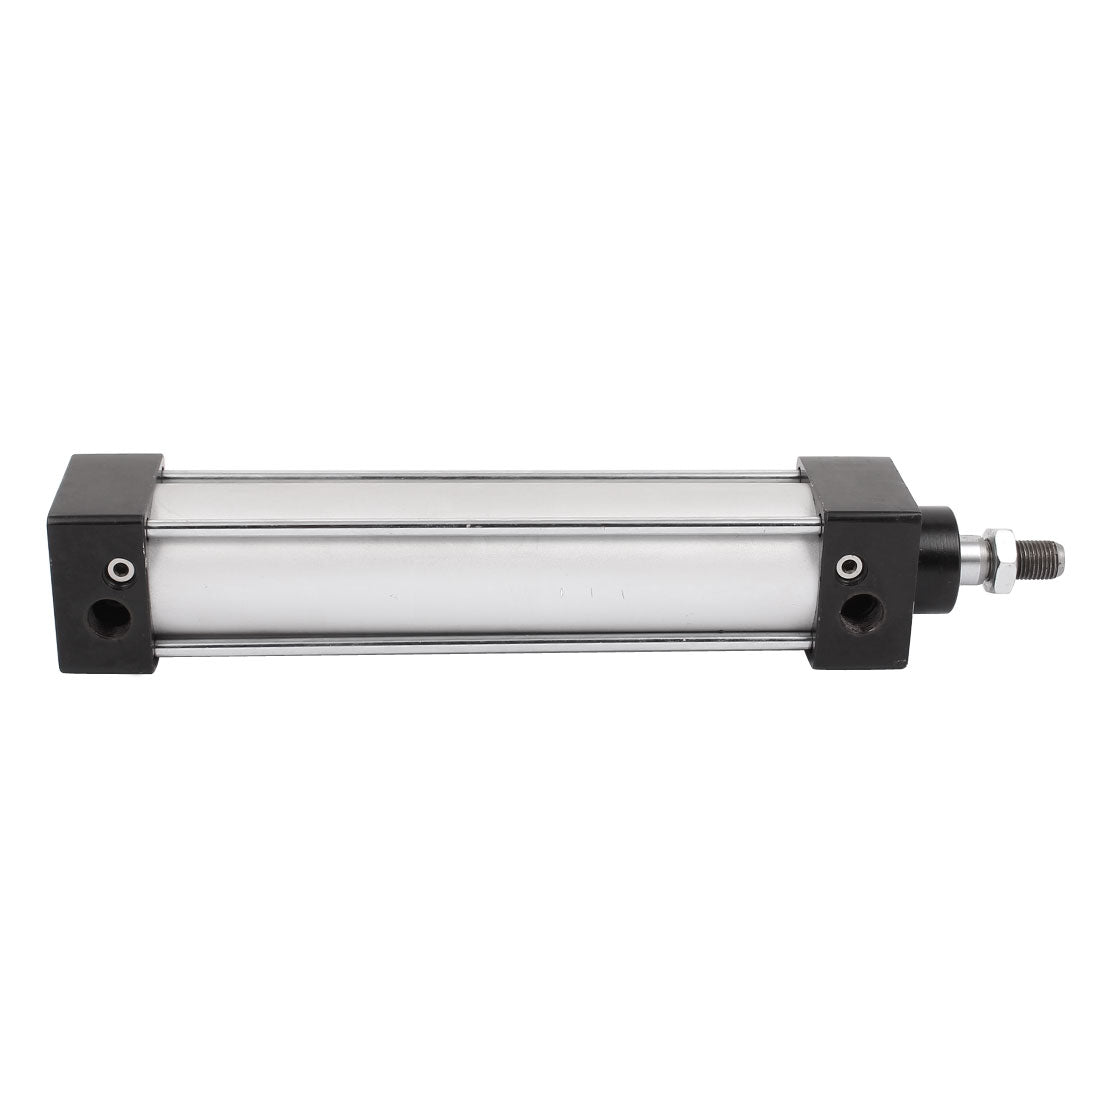 uxcell Uxcell SC40x150 Single Piston Rod Double Action Pneumatic Air Pressure Cylinder